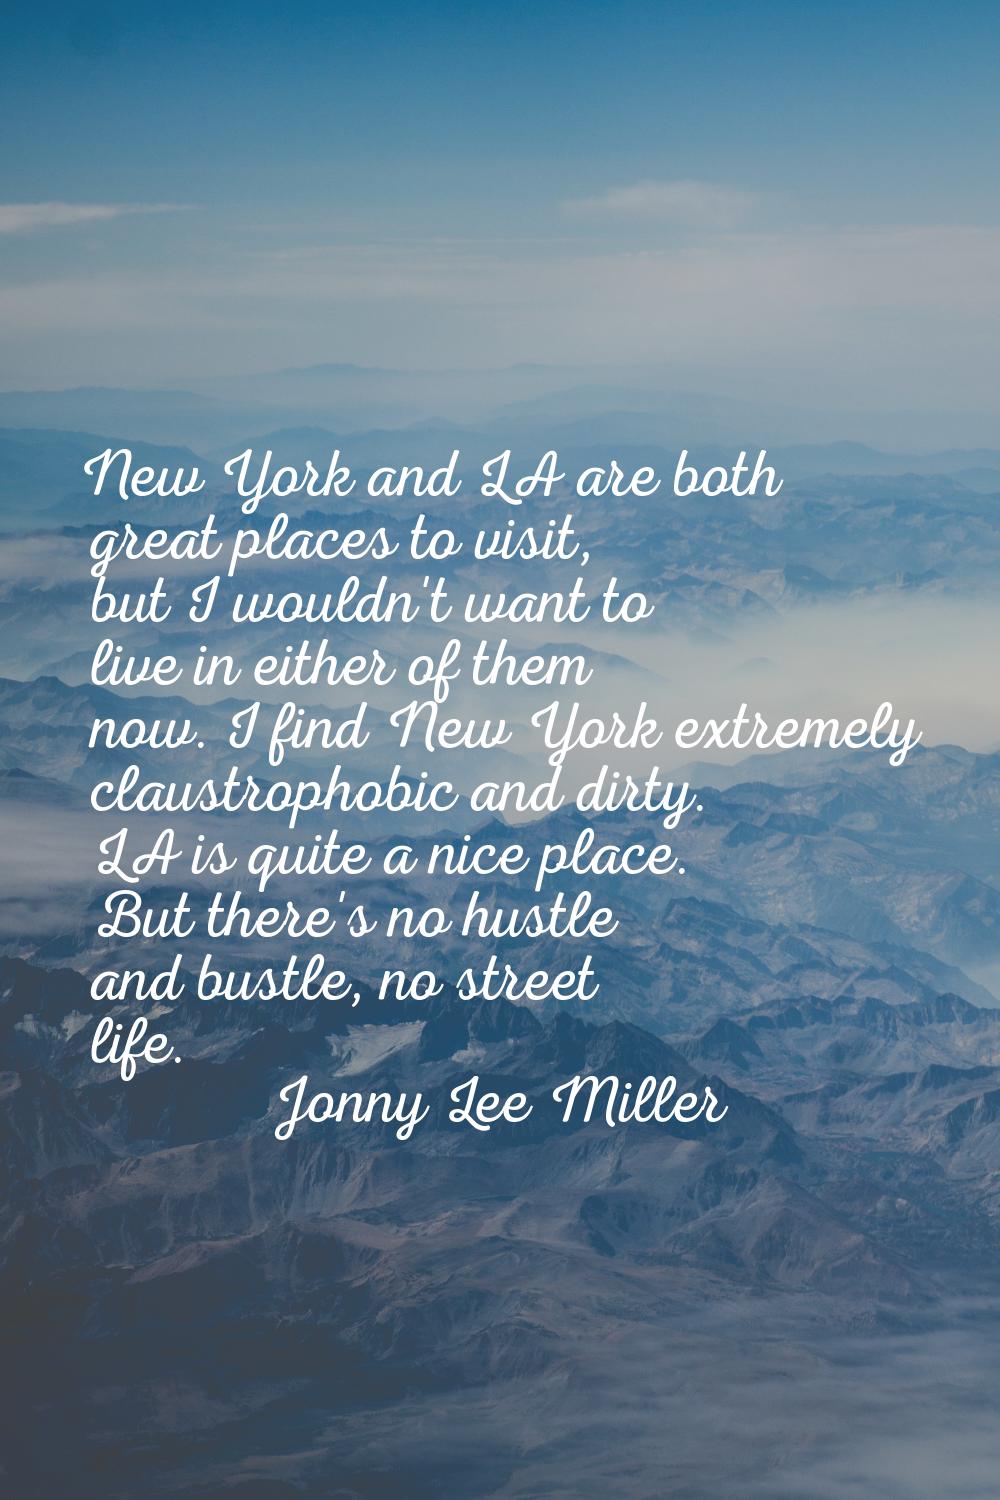 New York and LA are both great places to visit, but I wouldn't want to live in either of them now. 